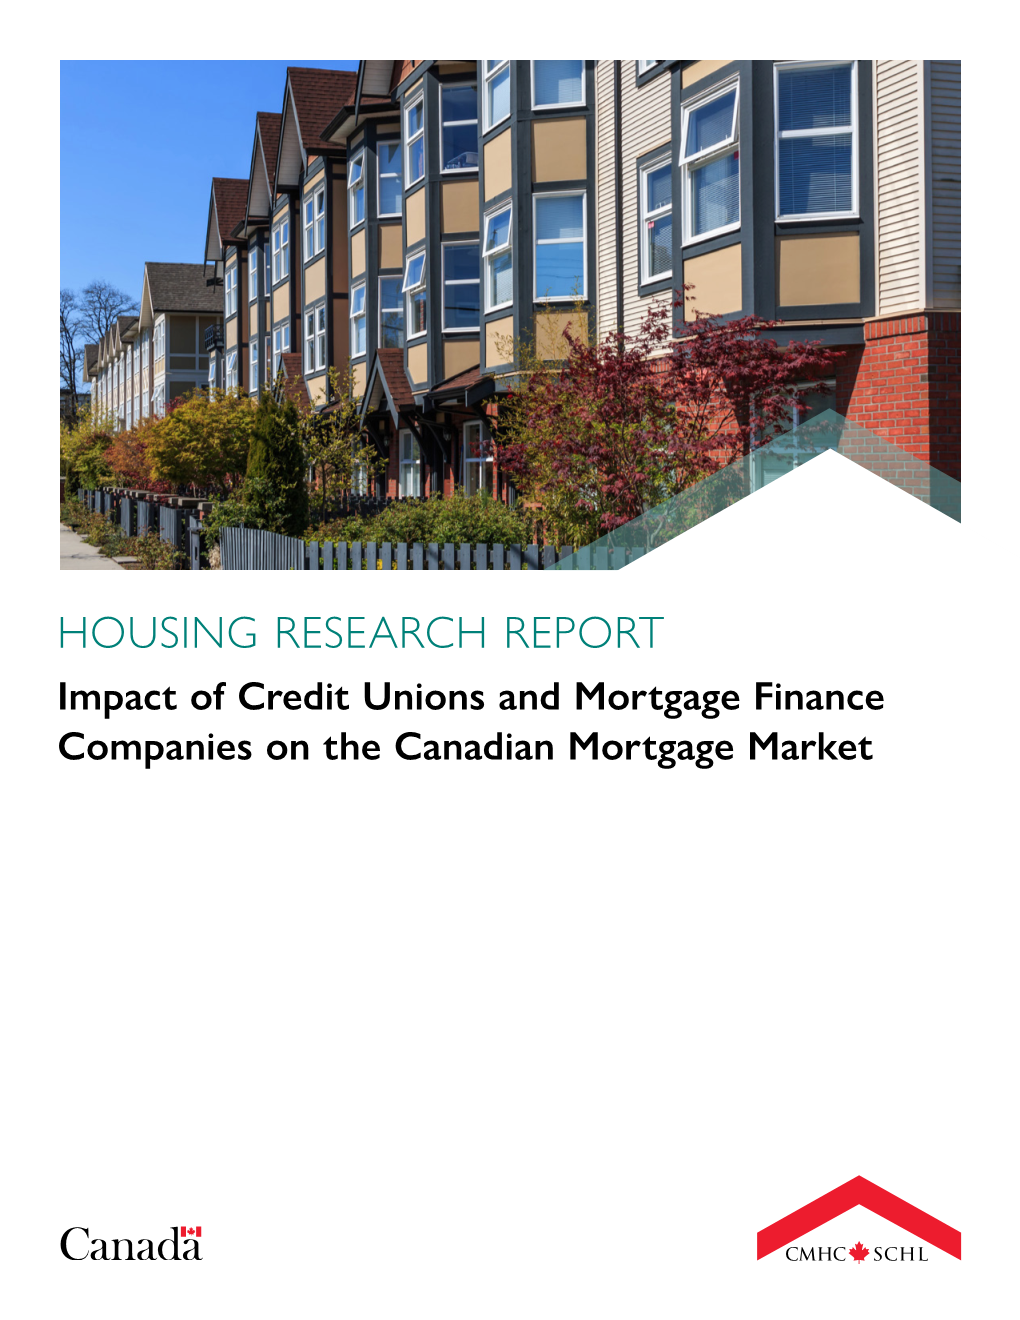 Impact of Credit Unions and Mortgage Finance Companies on the Canadian Mortgage Market CMHC Helps Canadians Meet Their Housing Needs